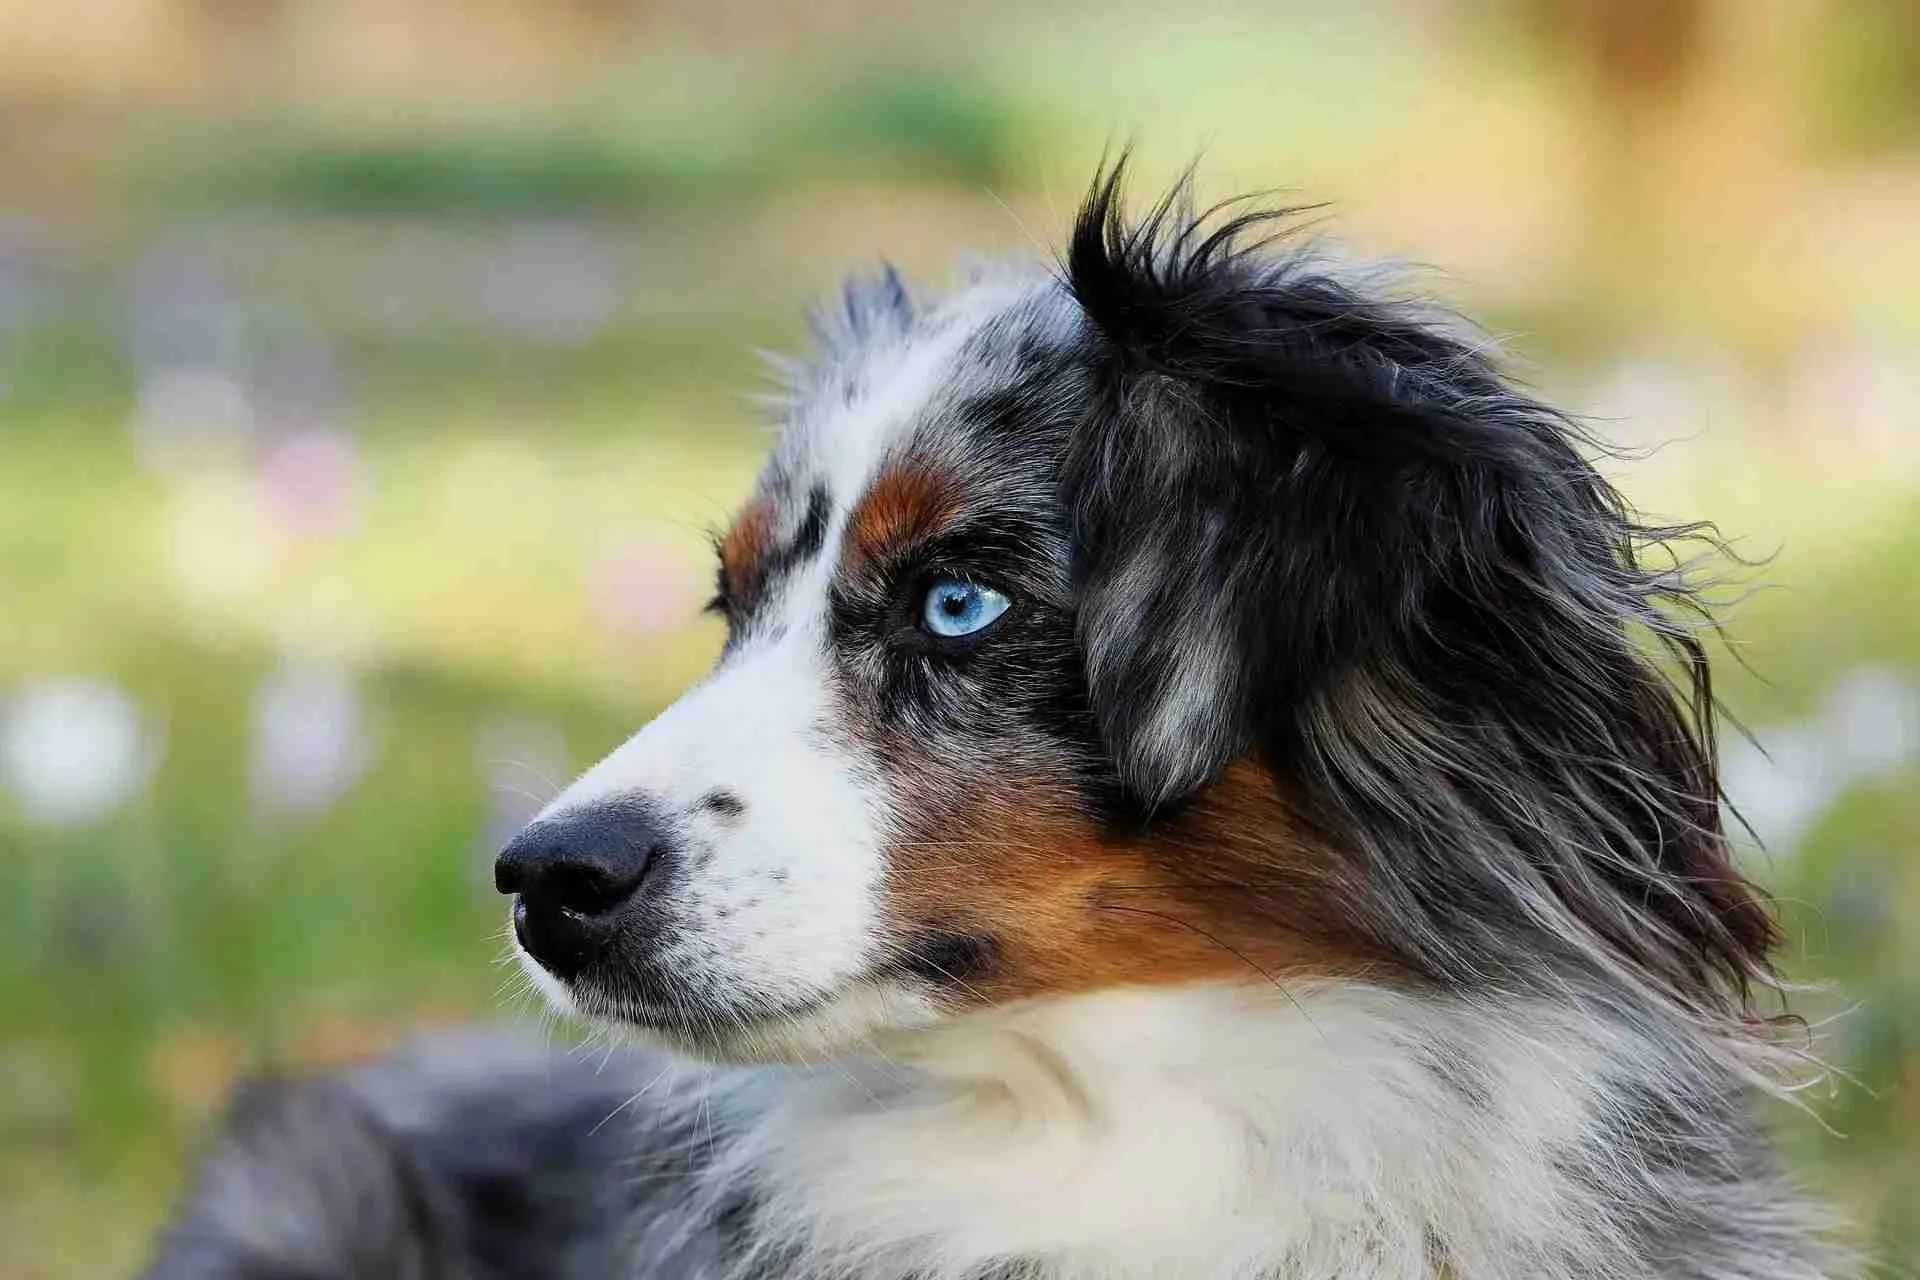 Before adding a new member to your family, read about the Australian shepherd lifespan.